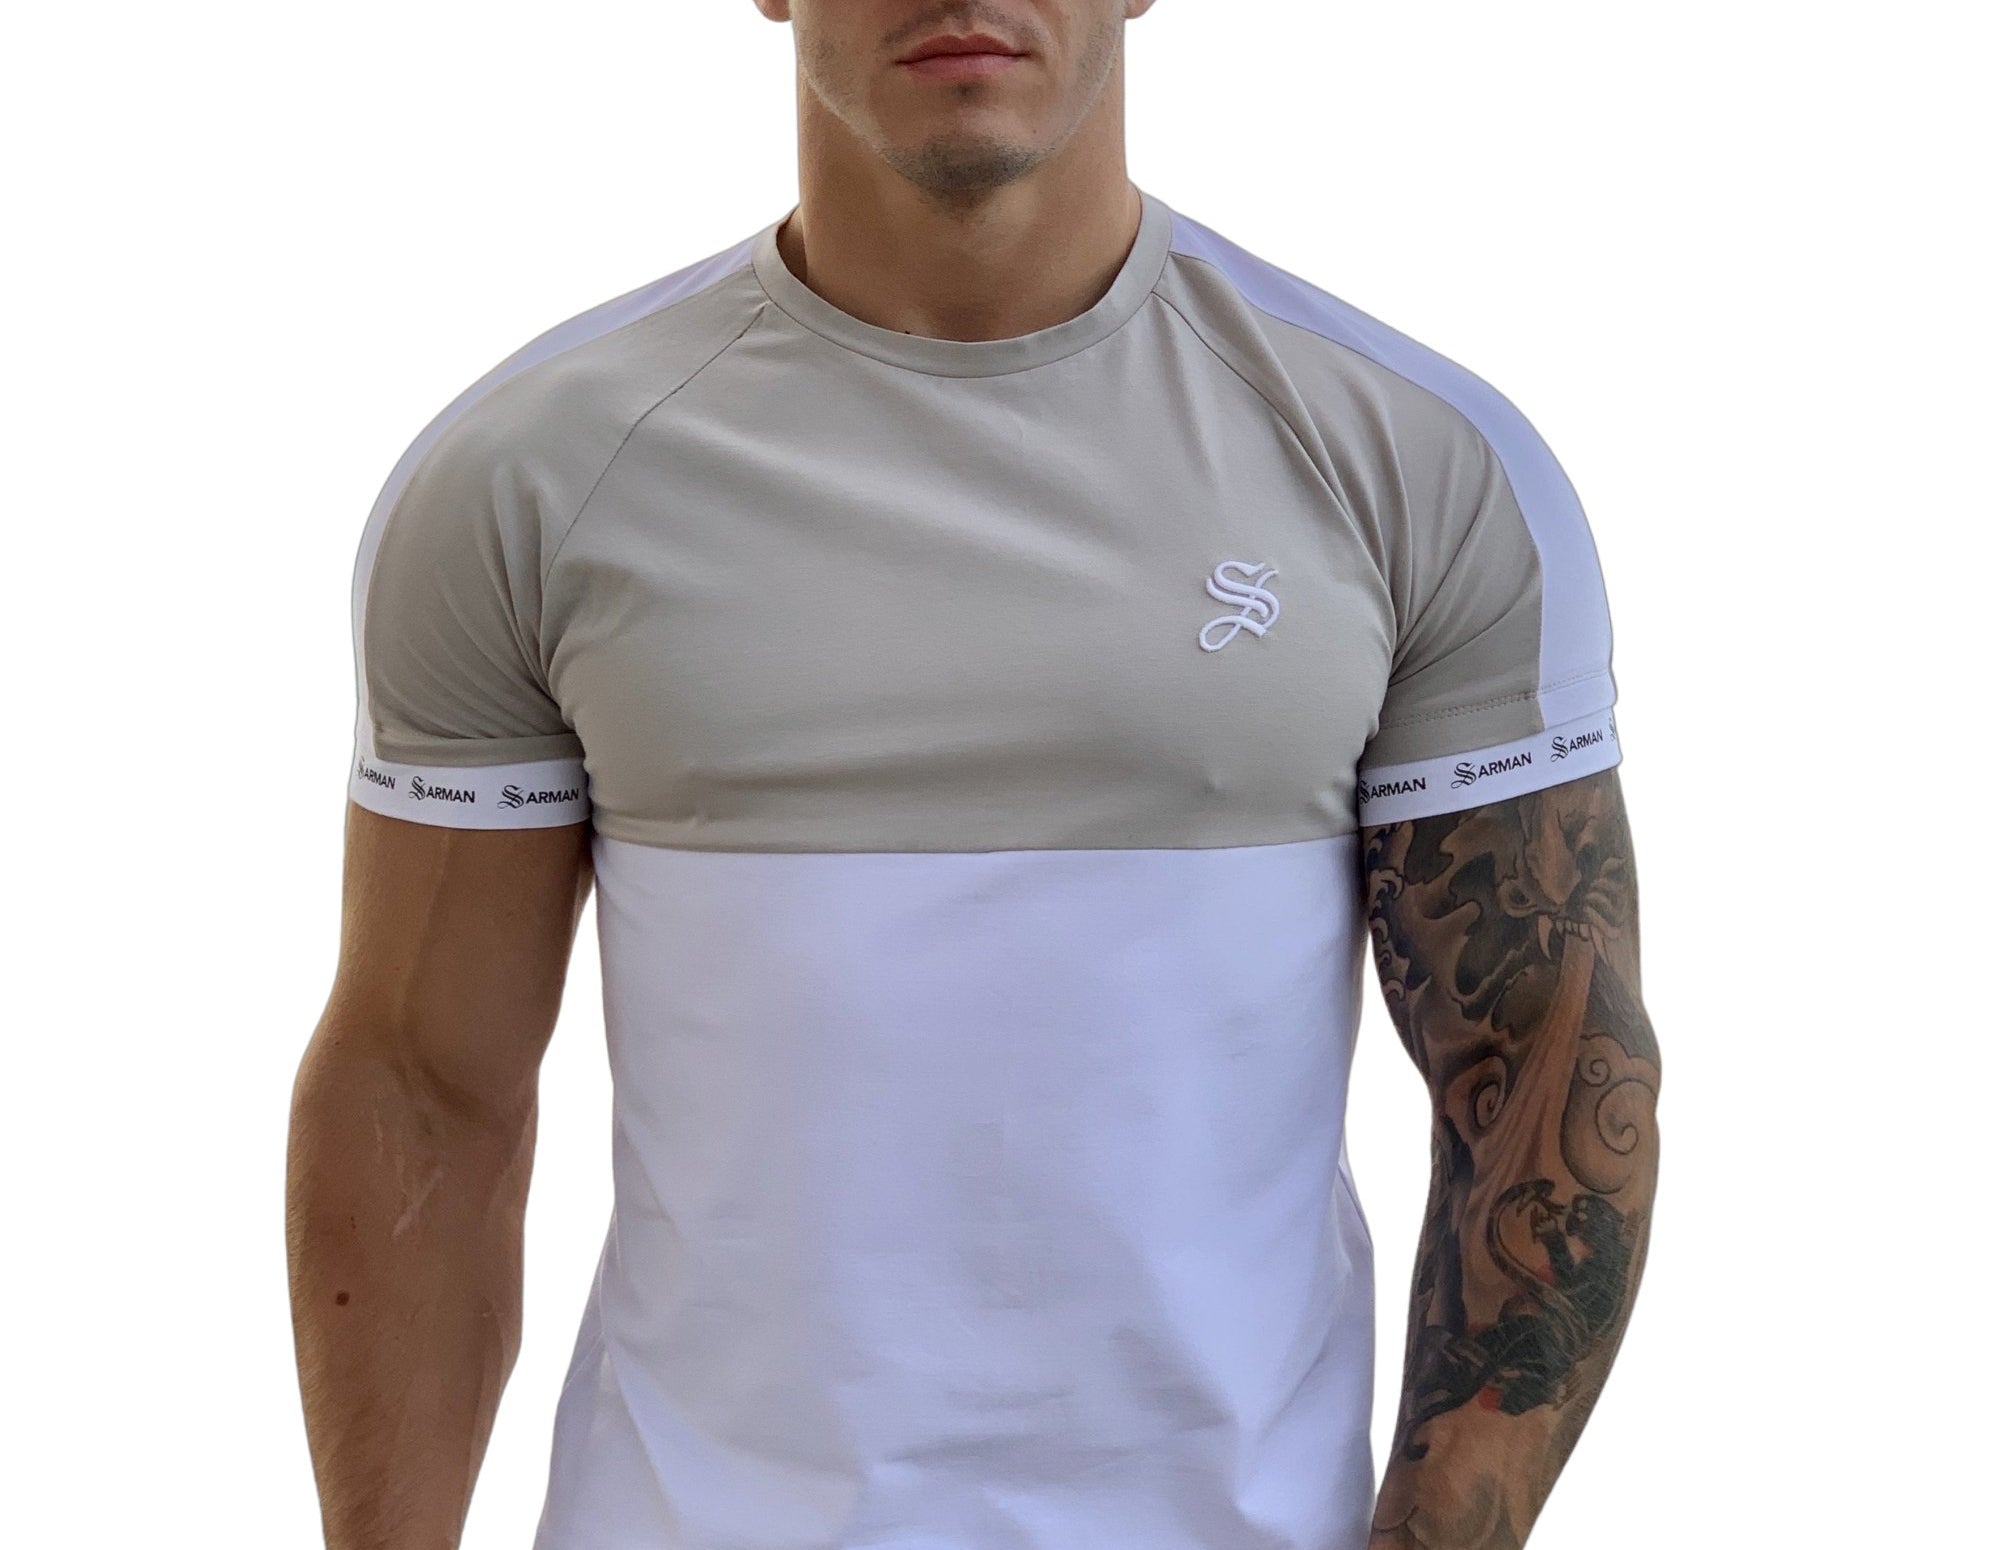 Almighty - White/Grey T-shirt for Men - Sarman Fashion - Wholesale Clothing Fashion Brand for Men from Canada